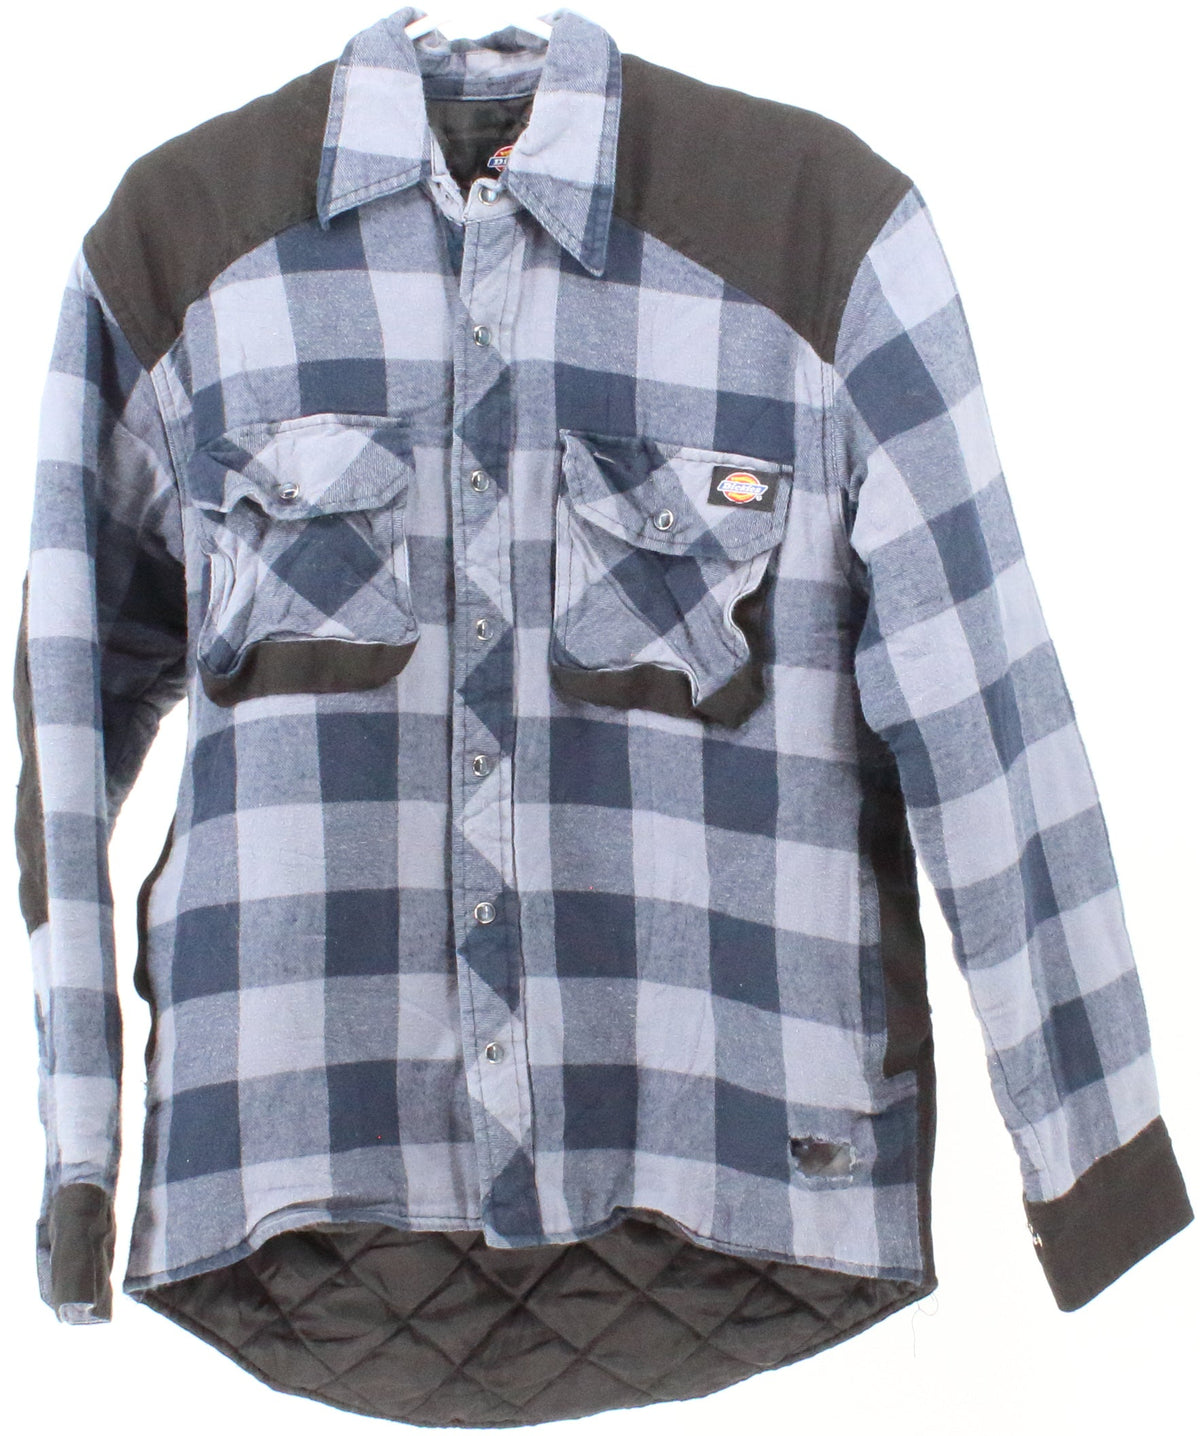 Dickies Blue Checkered Shirt With Black Patches